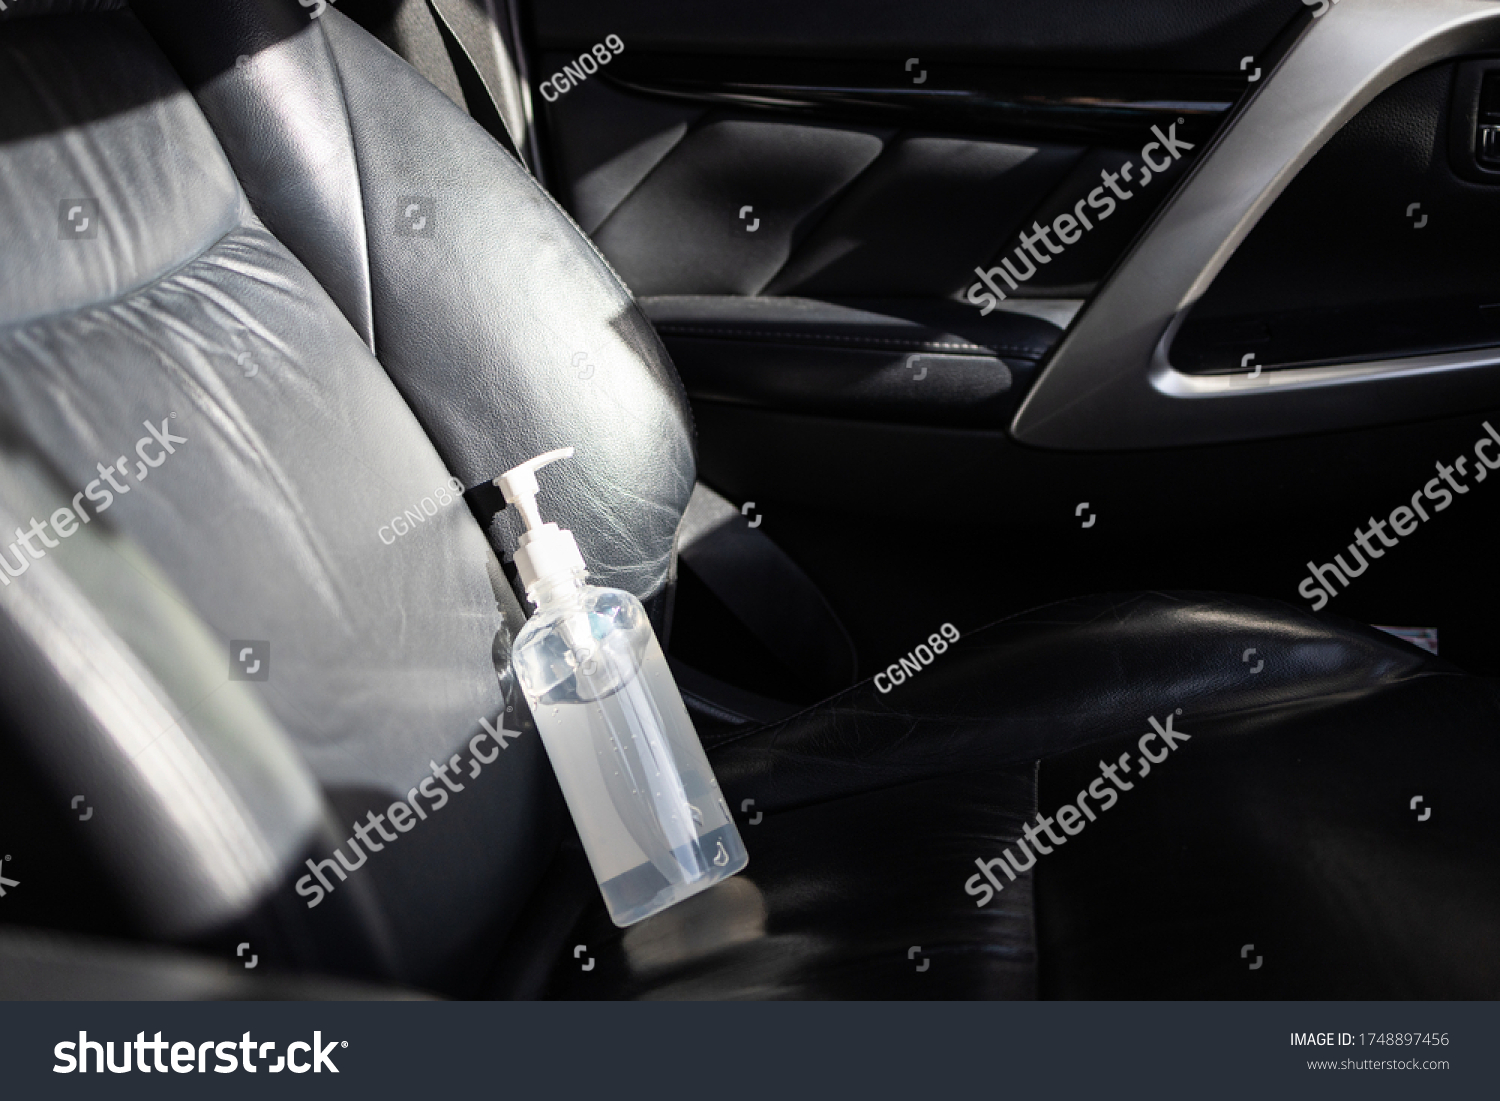 Hand sanitizer placed on car seat and exposed to sun in sunny day,do not keep alcohol antiseptic gel in the car,could start a fire,flammable objects,cause danger if parked in the sunshine,very hot day #1748897456